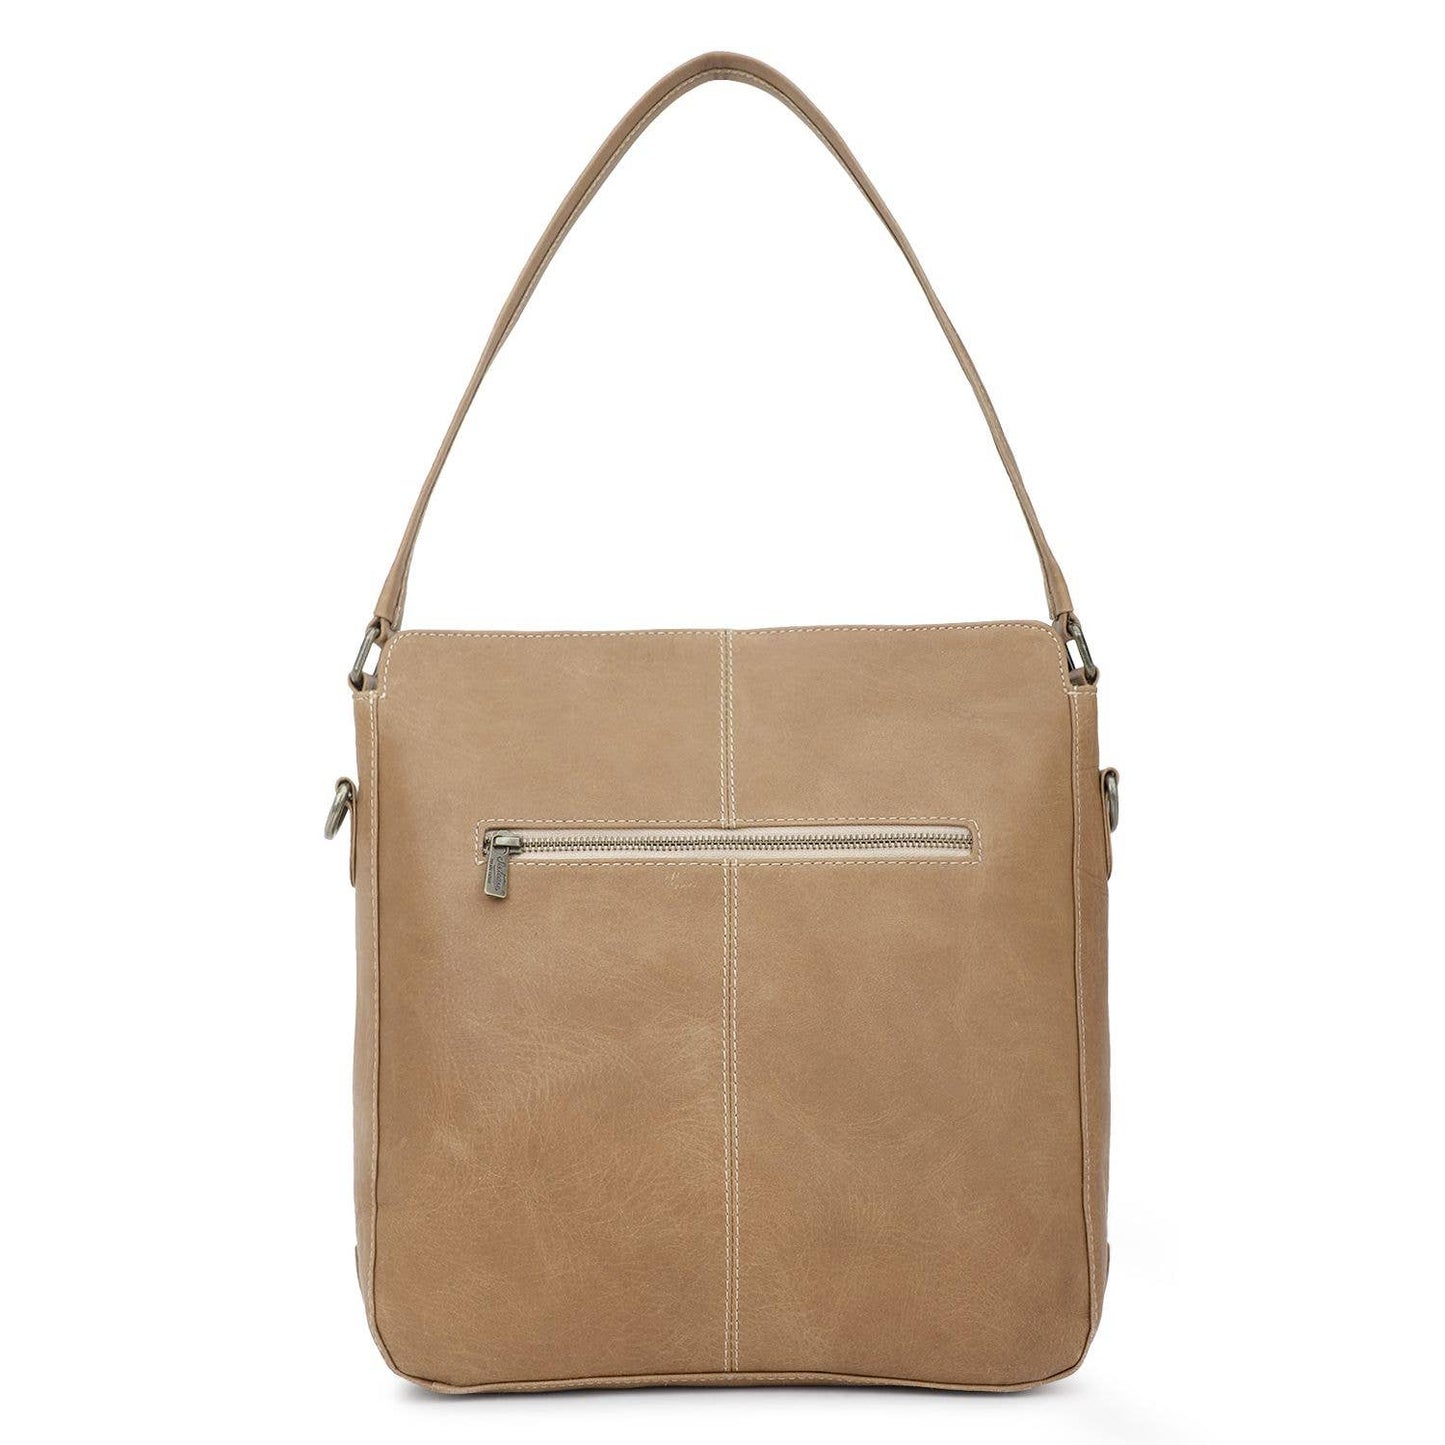 Leather and Cowhide Shoulder Bag - Brown White